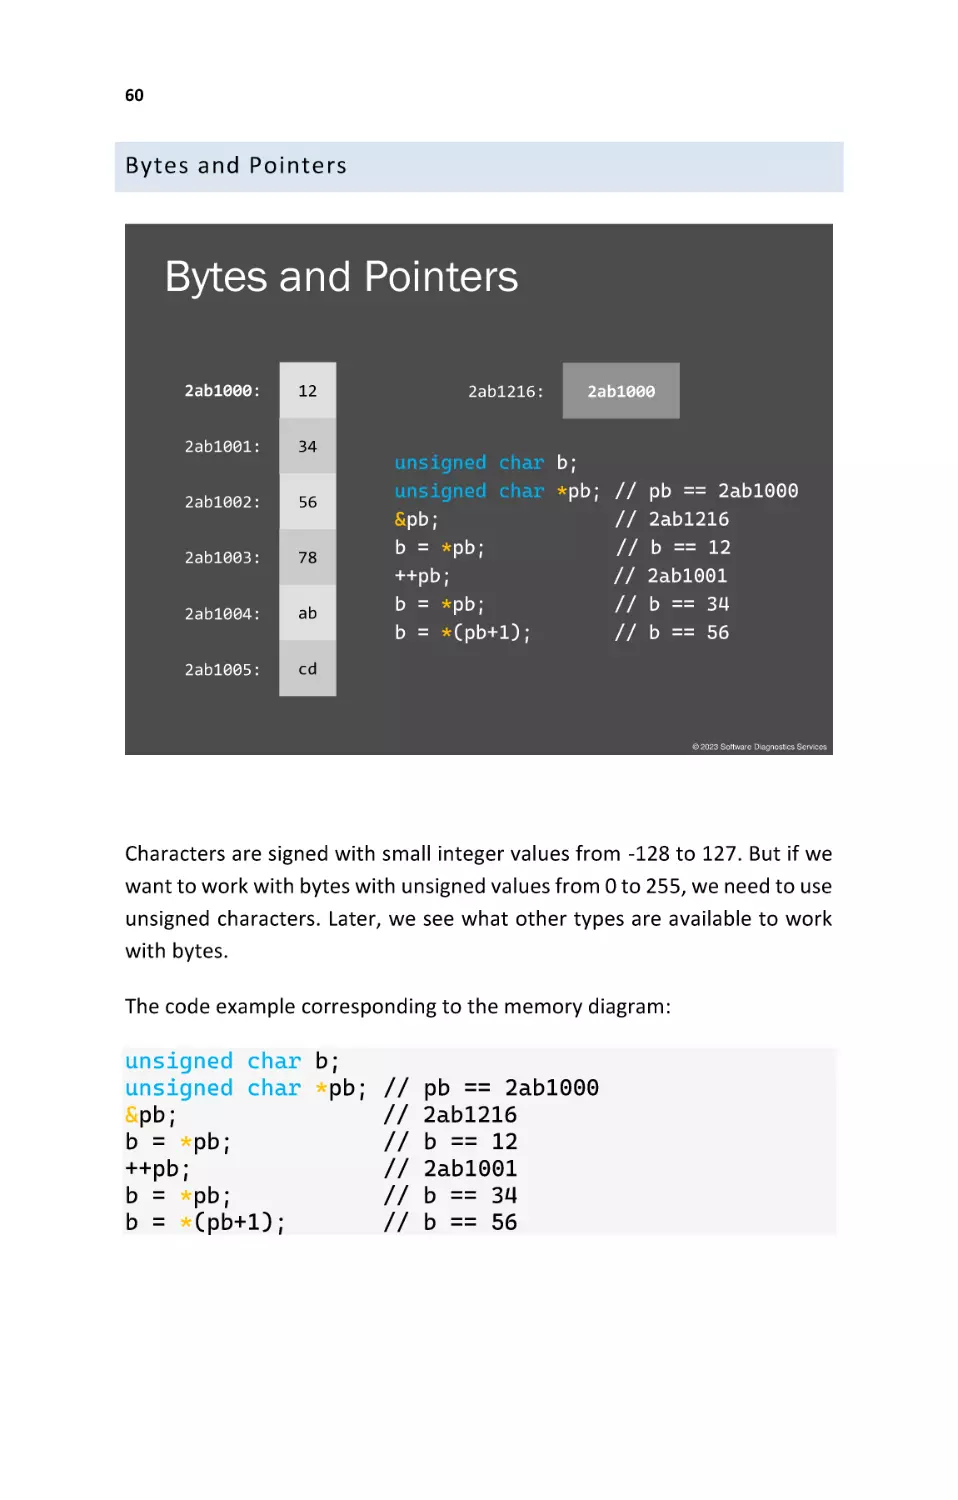 Bytes and Pointers